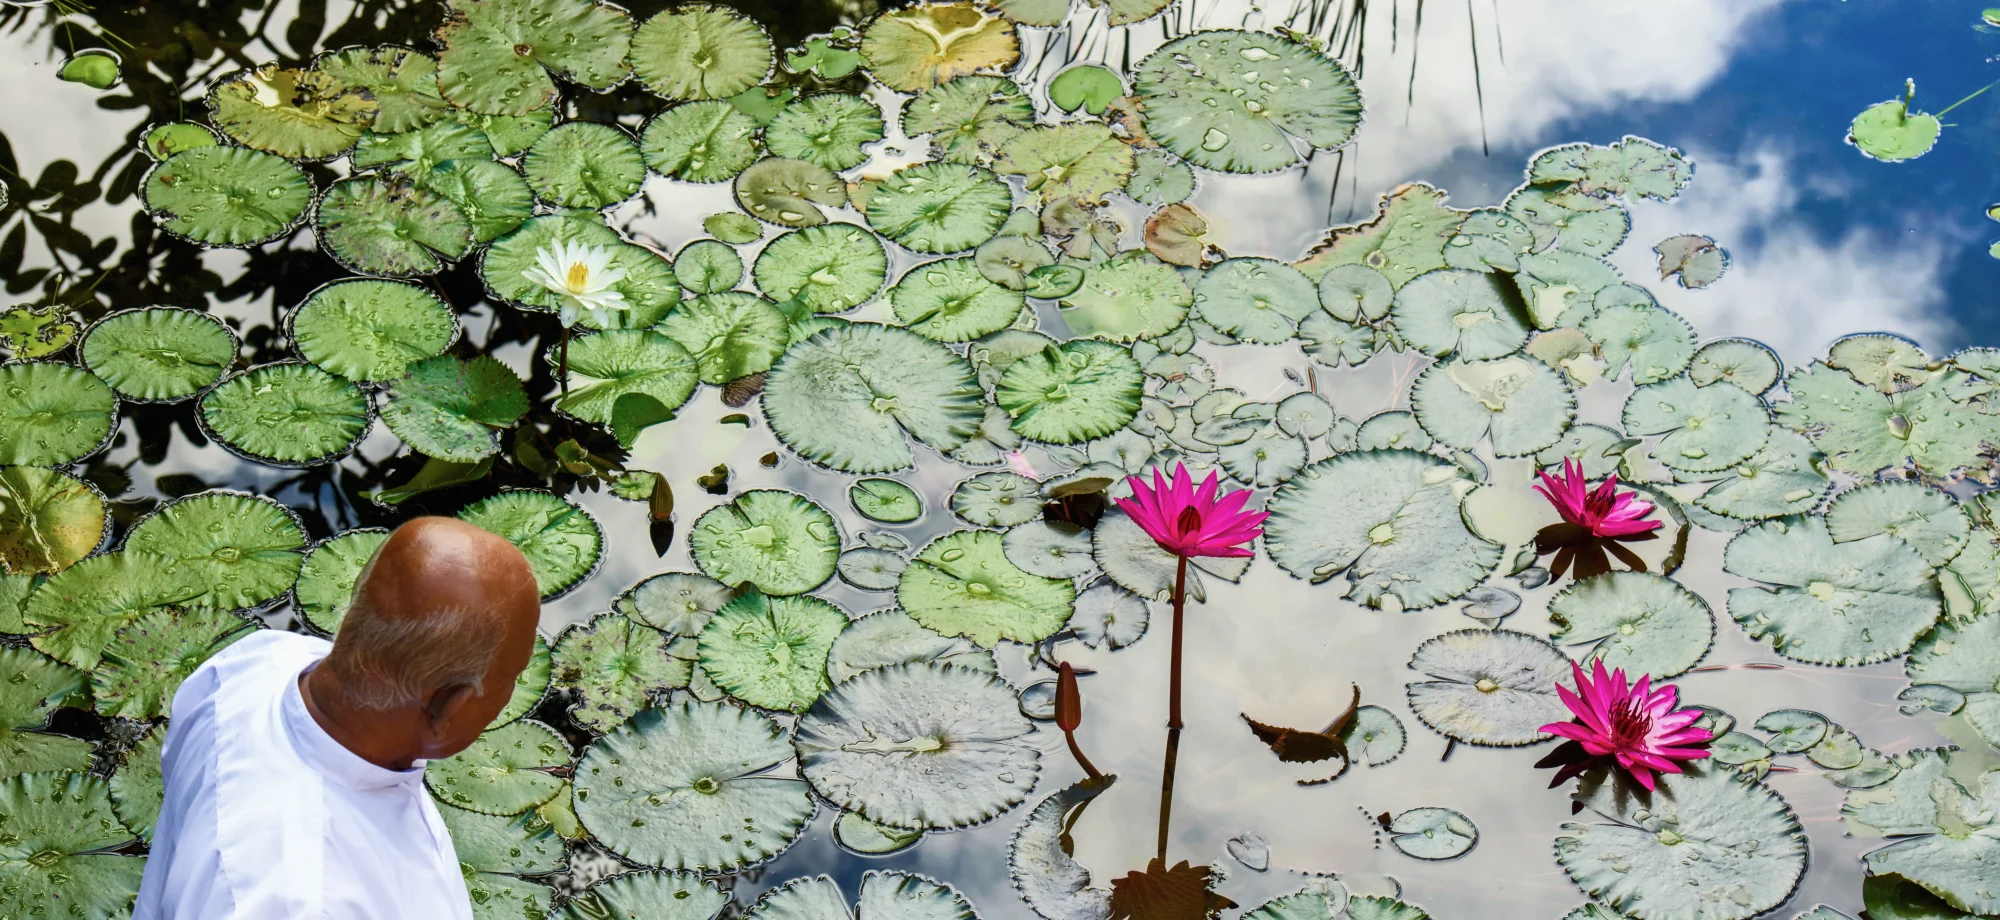 A man gazes at the hotel's beautiful lily pond. There are pink lilies amongst the reflective waters.